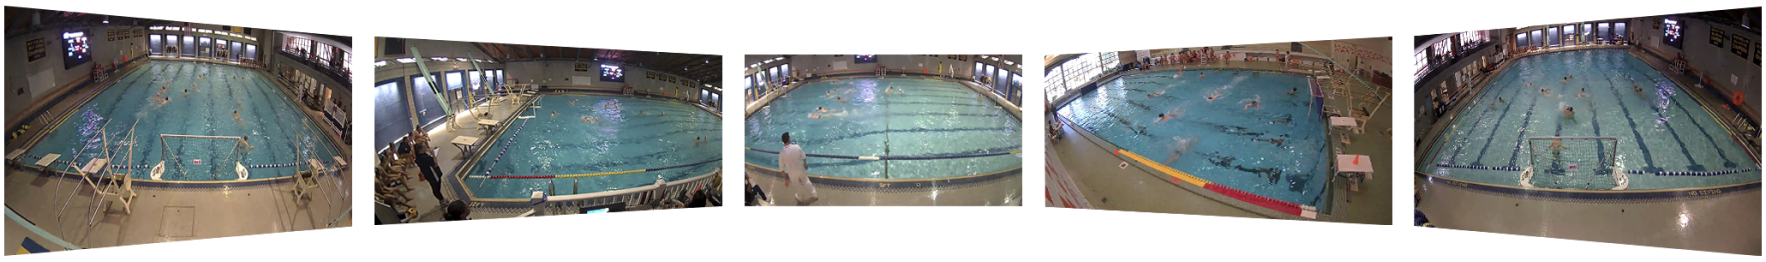 Waterpolo Image Views Https://Playsight.com